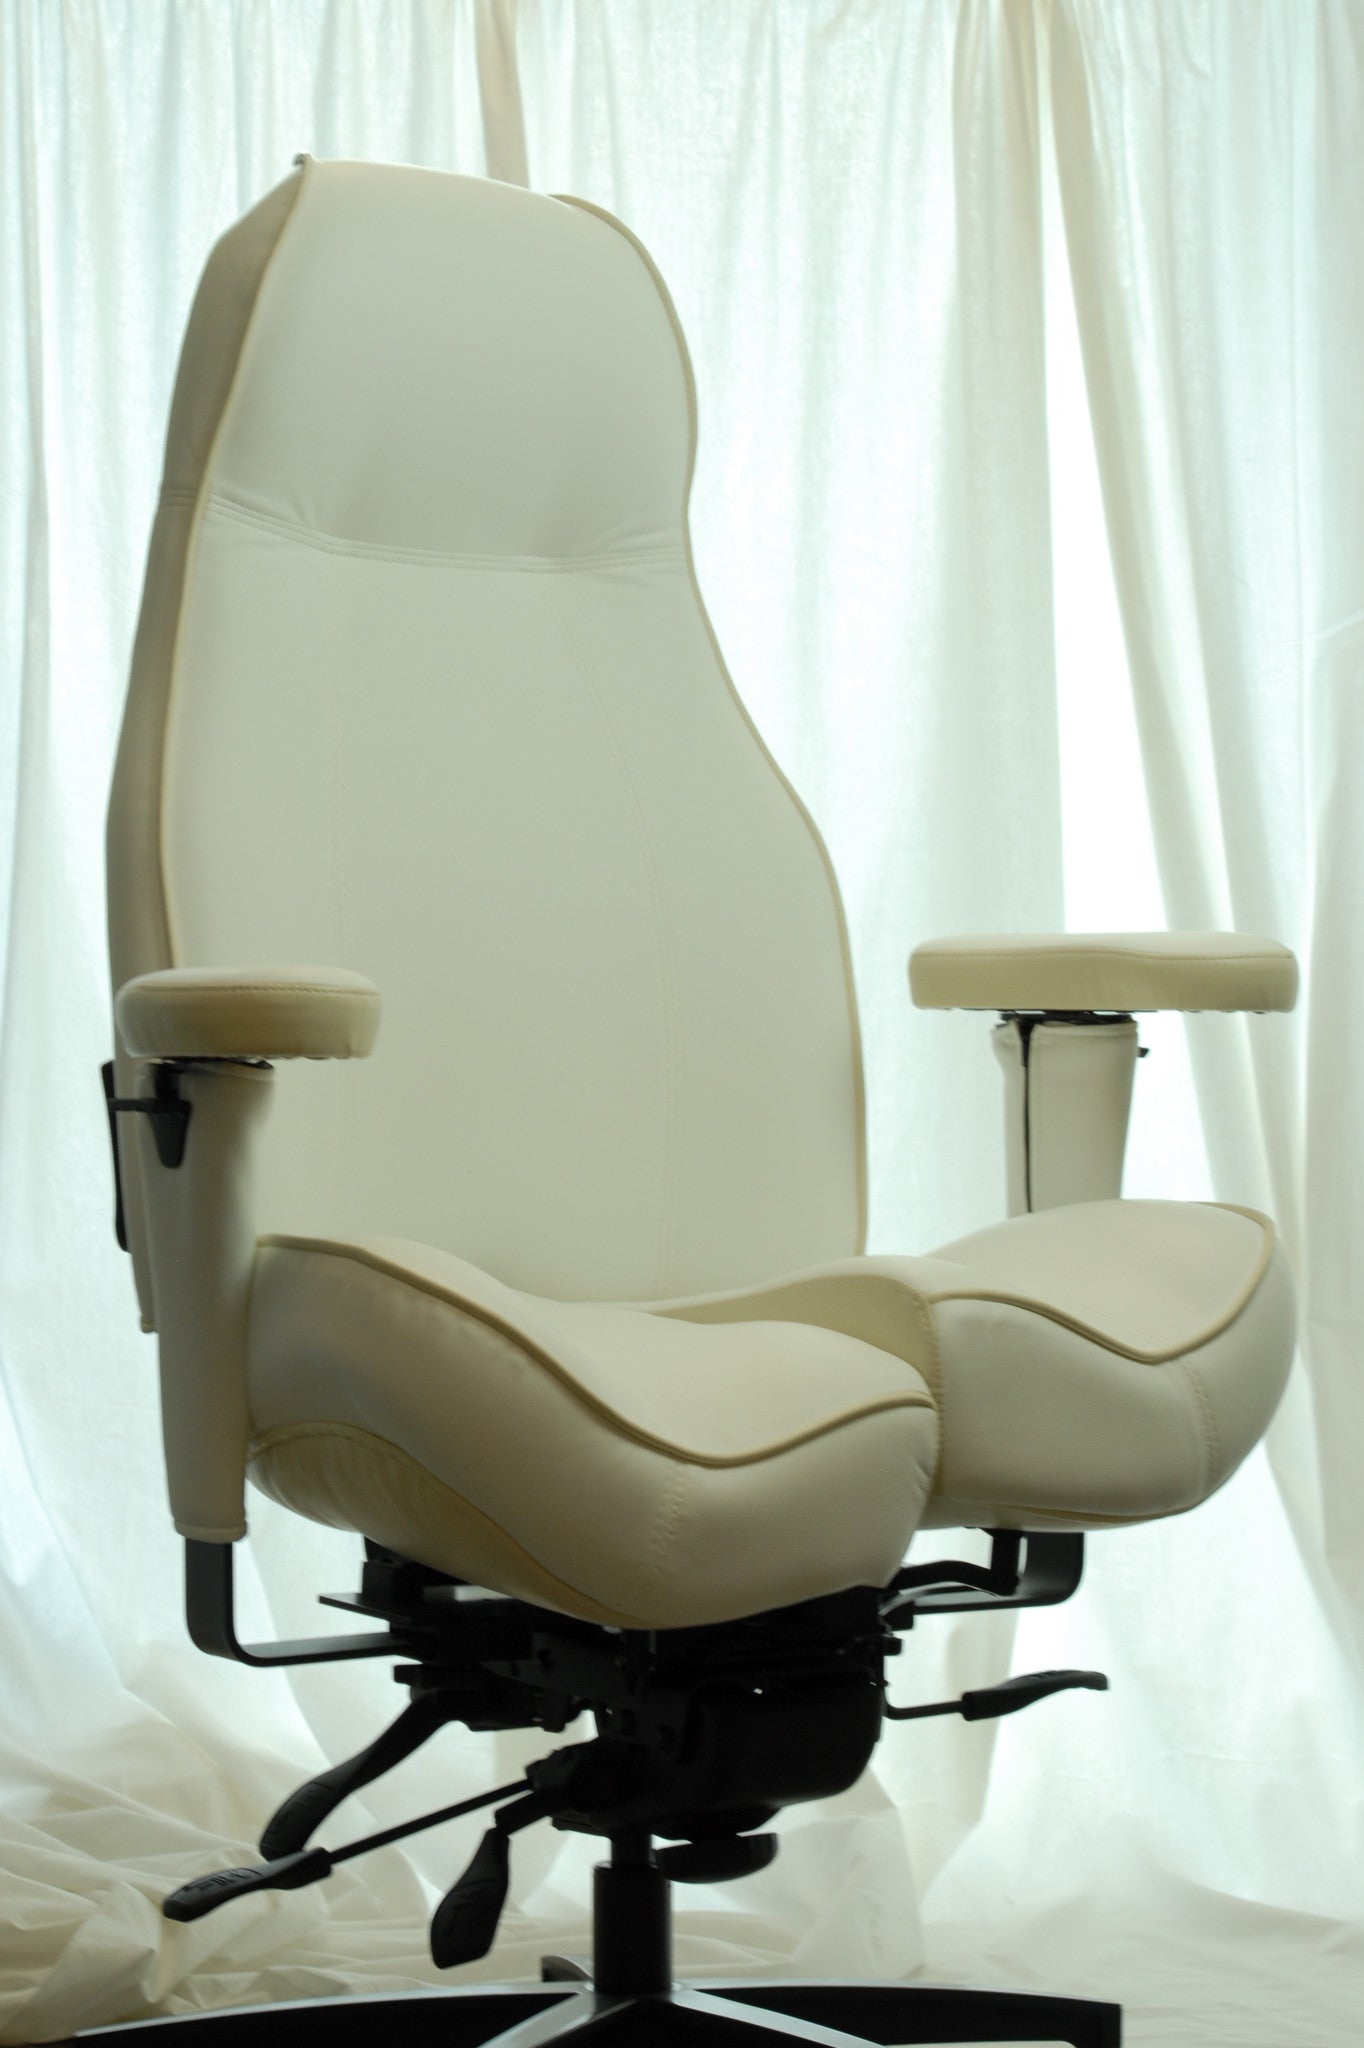 https://cdn.shopify.com/s/files/1/0371/2201/products/2390_UltraLeather_UL_White_UL_White_Contrast_Piping_Deep_Contour_Seat_Core-Flex_MAP_2620.jpg?v=1458711321